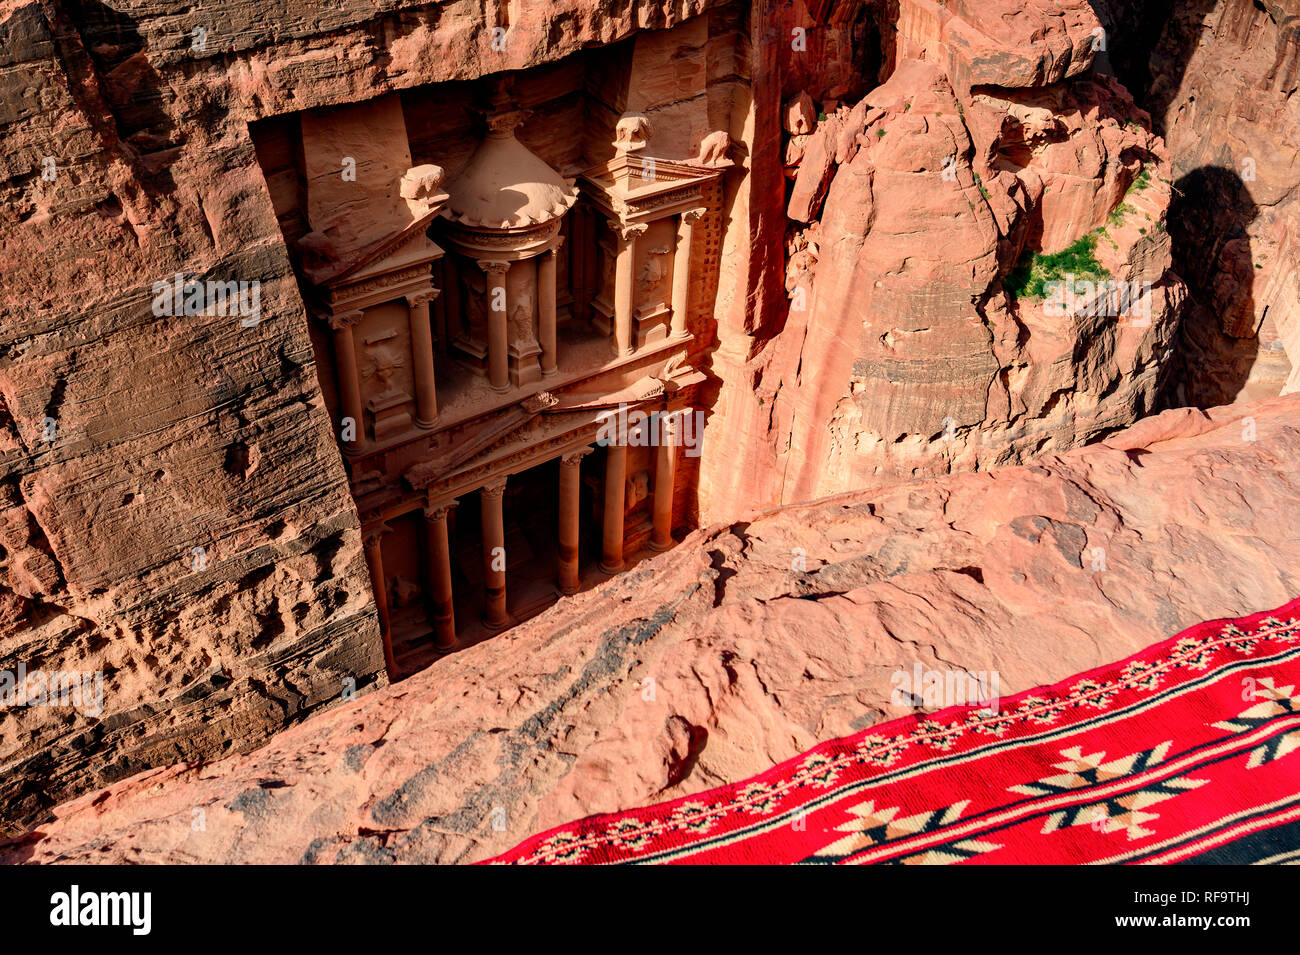 Spectacular view from above of Al Khazneh (The Treasury) in Petra during a sunny day. Stock Photo